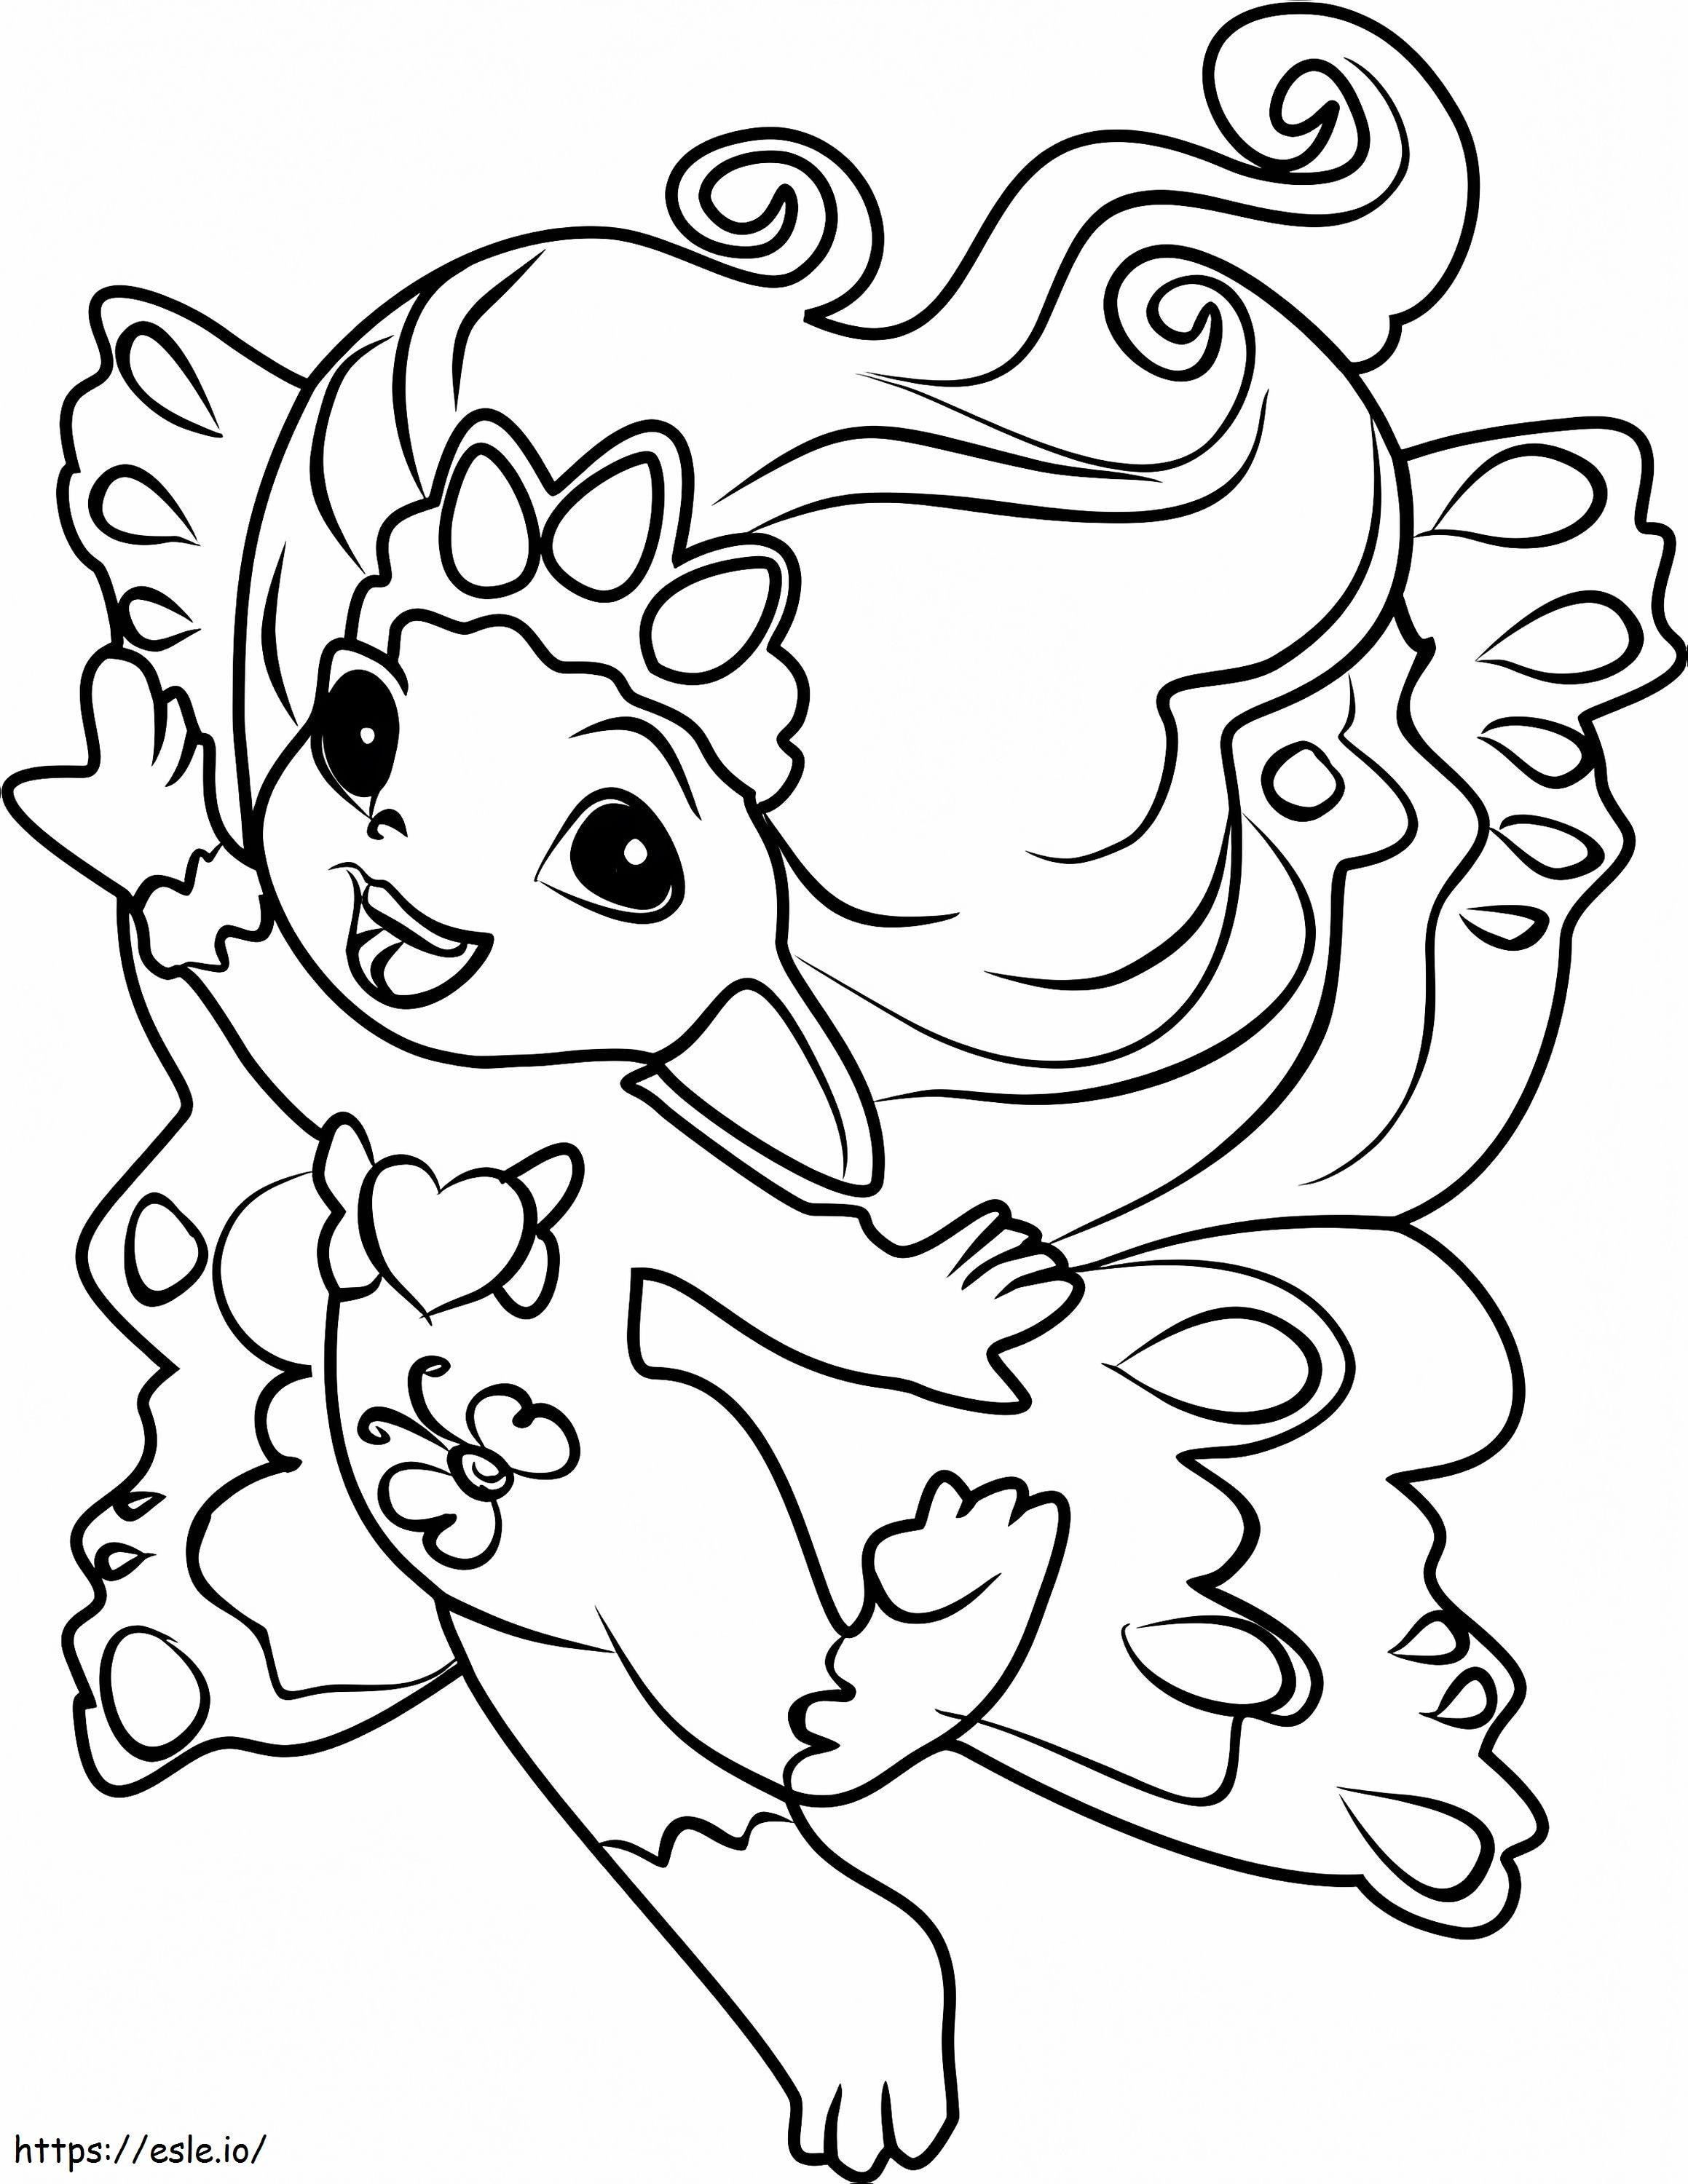 1530671504 Princess Crystella Herself A4 coloring page